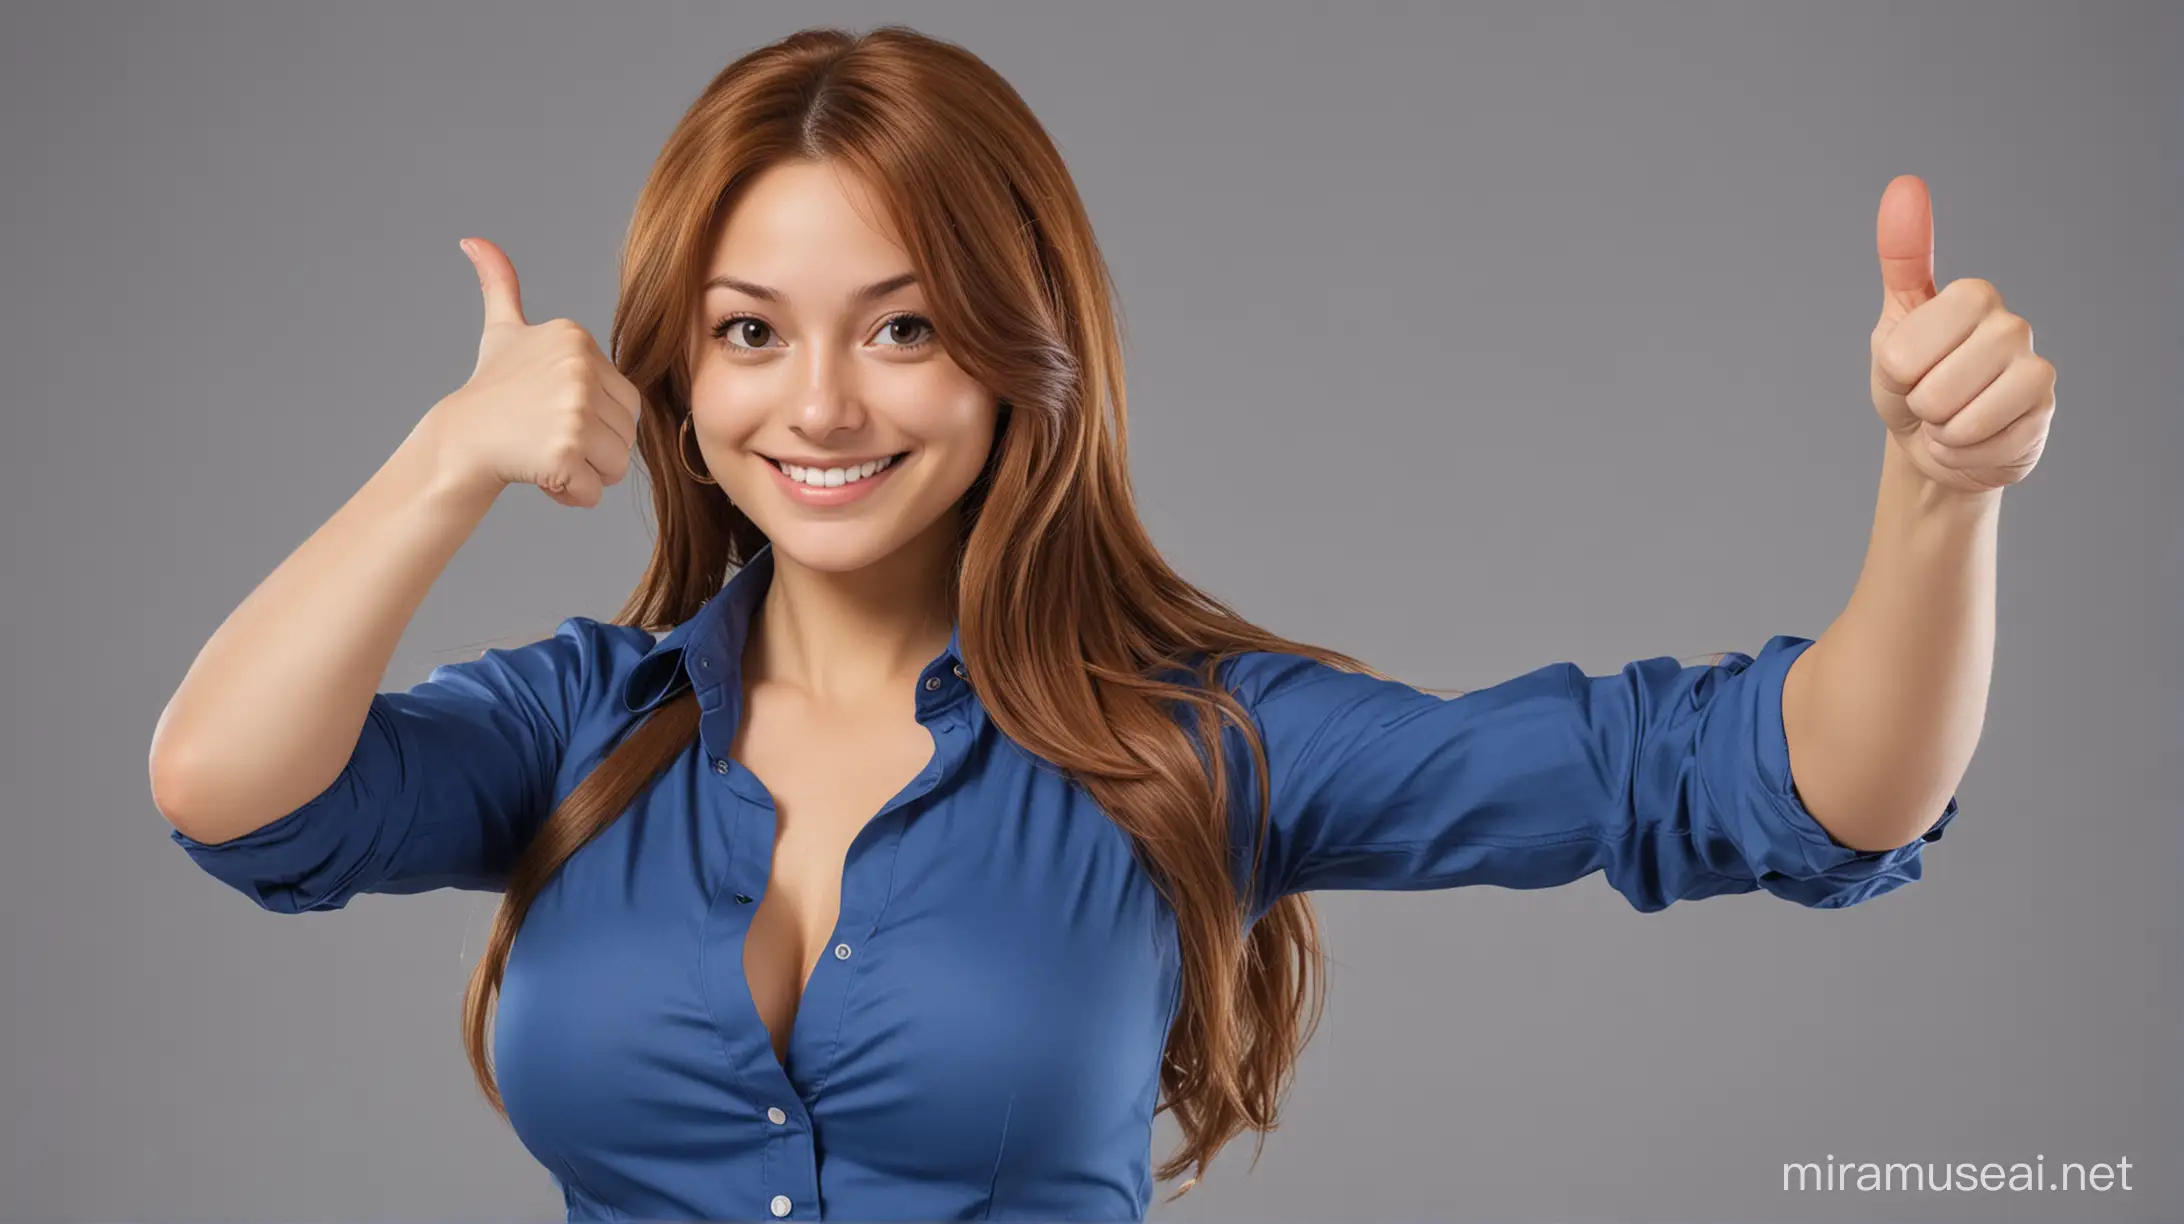 Smiling Girl with Long Brown Hair and Blue Shirt Giving ThumbsUp Gesture